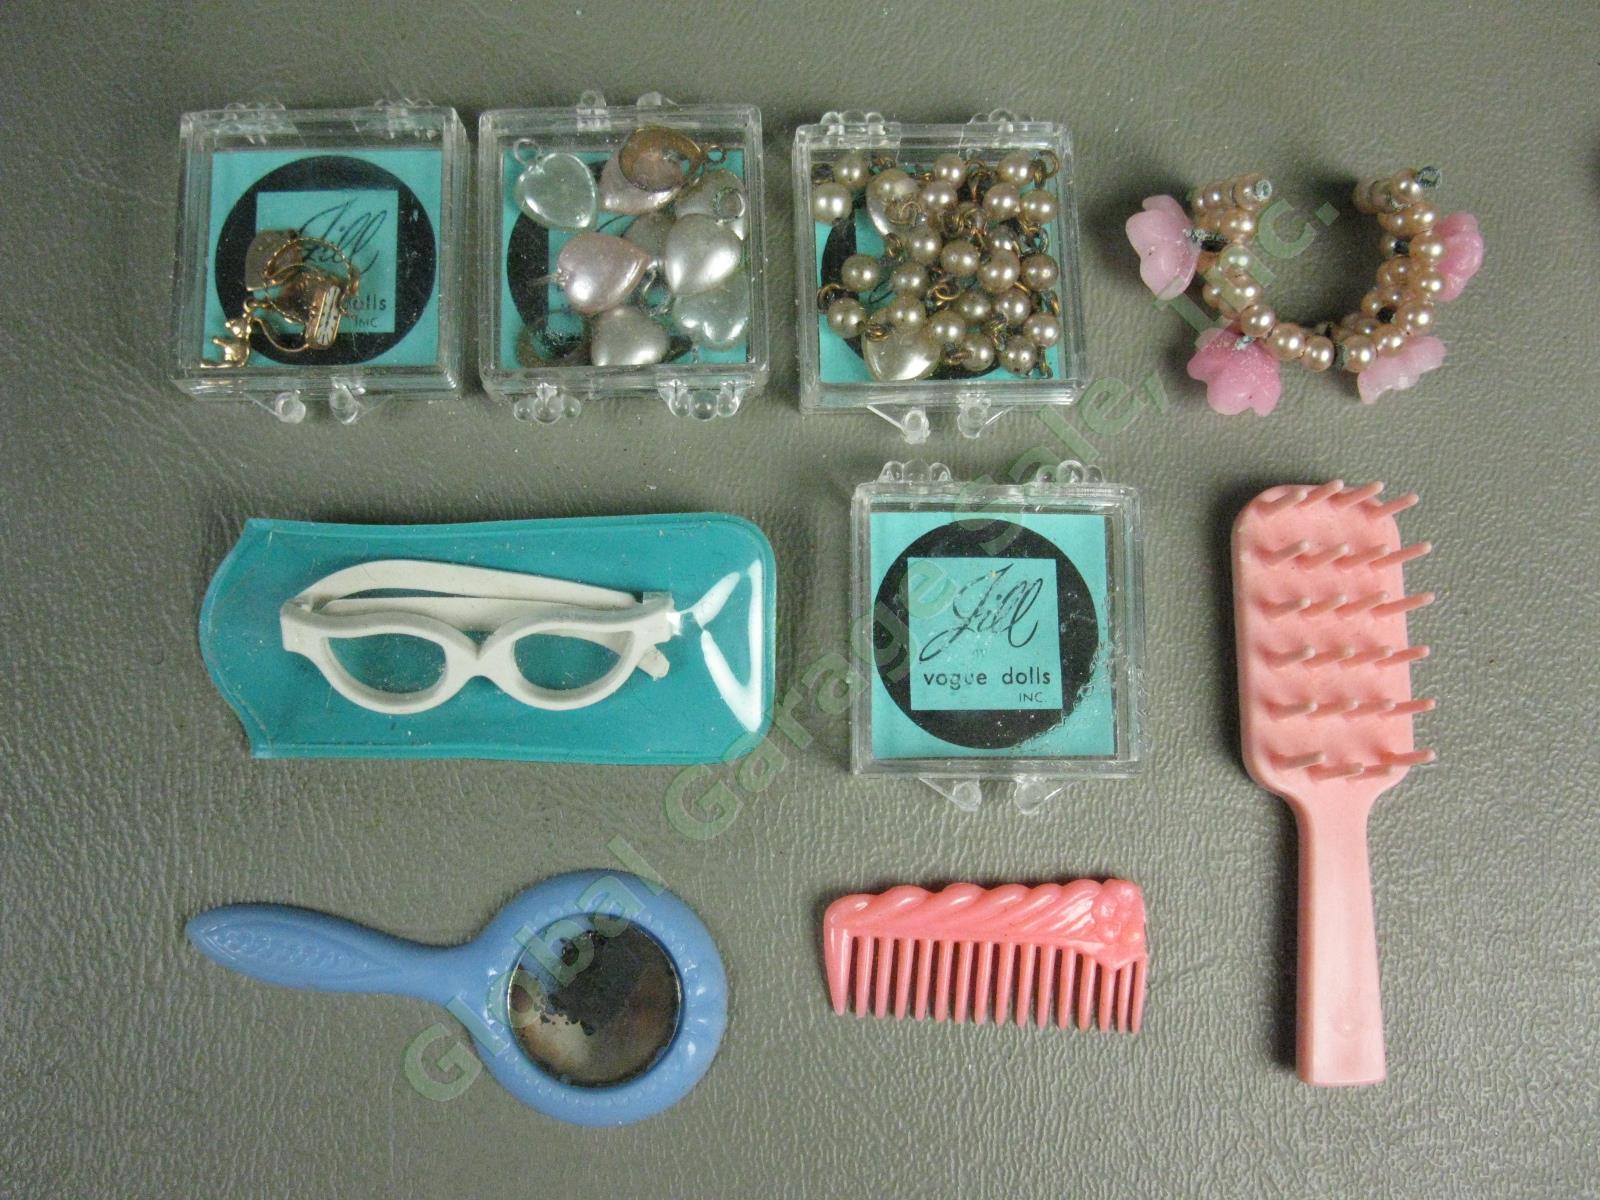 Huge Vintage 1950s Vogue Jill Doll Clothing Jewelry Accessories Collection Lot 7